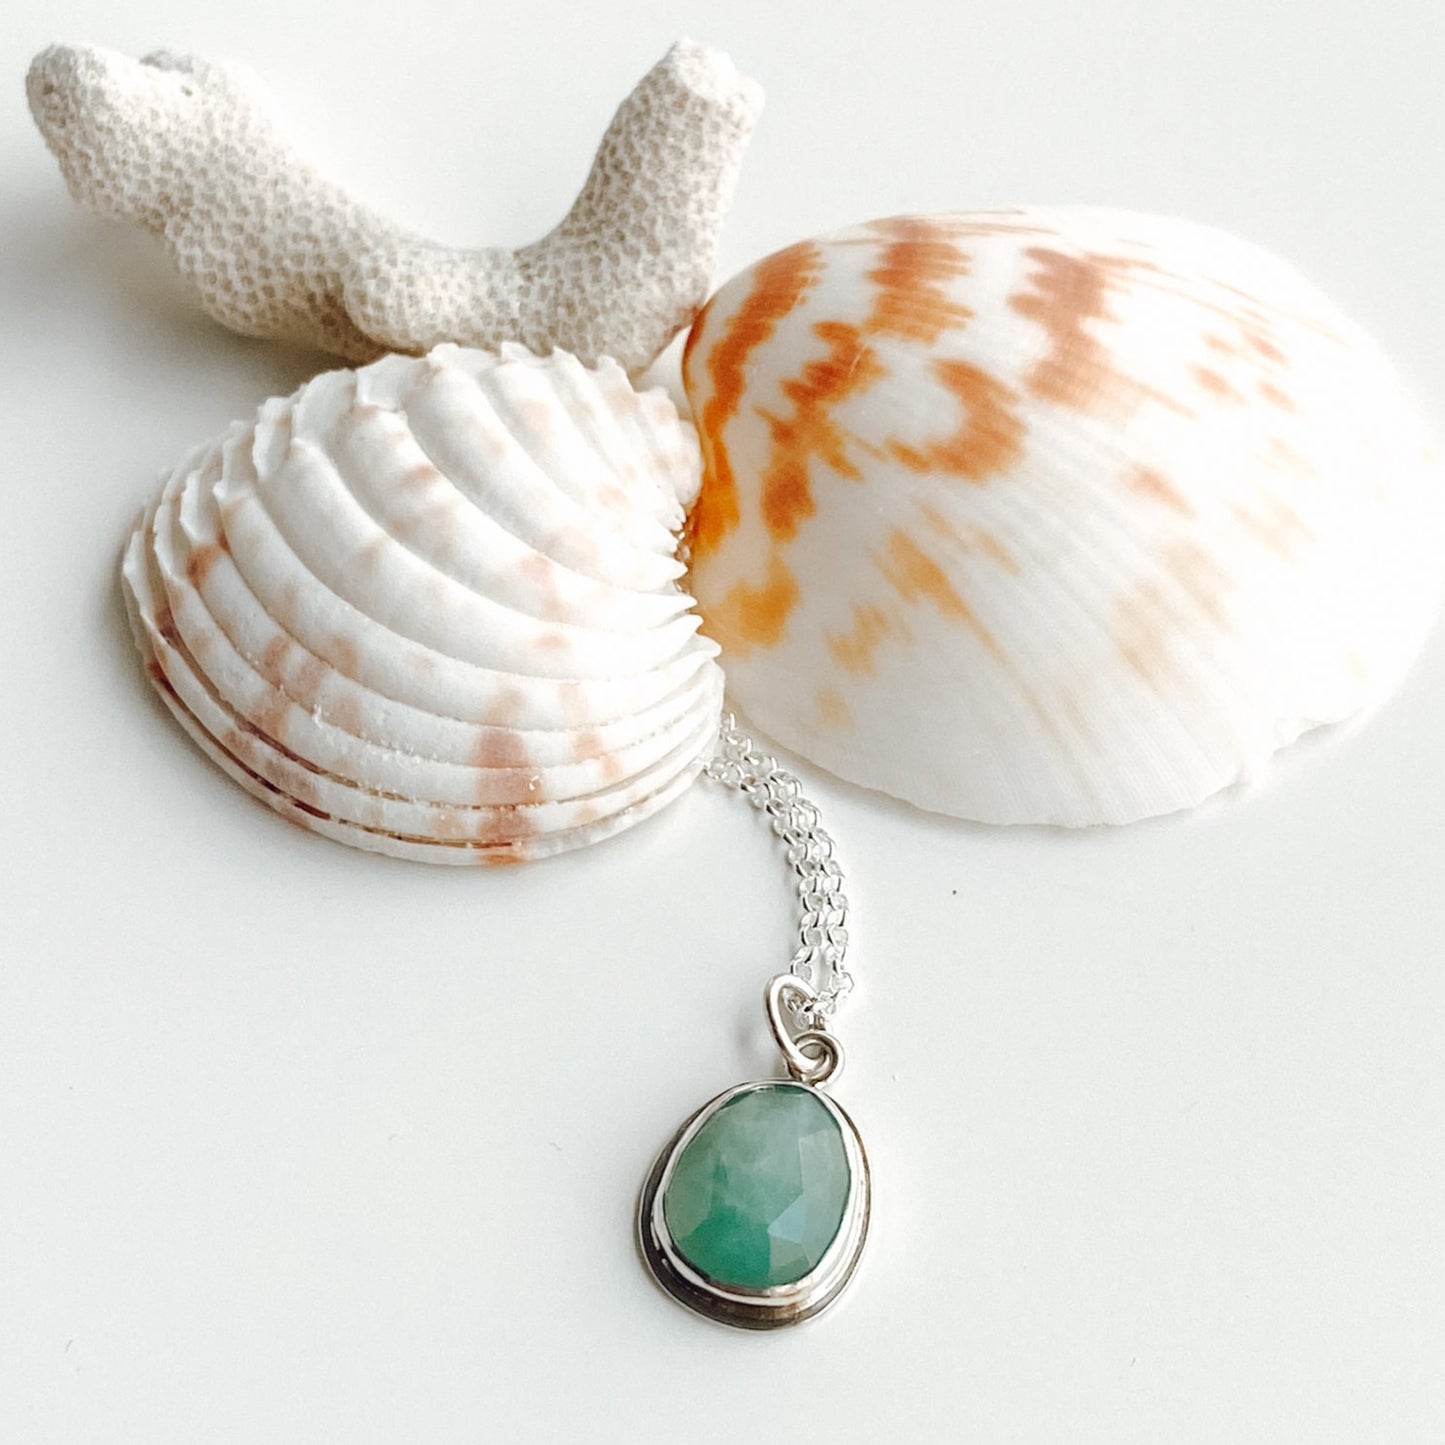 Aqua gandiderite gemstone pendant displayed on a white background with two sea shells and a piece of white coral.